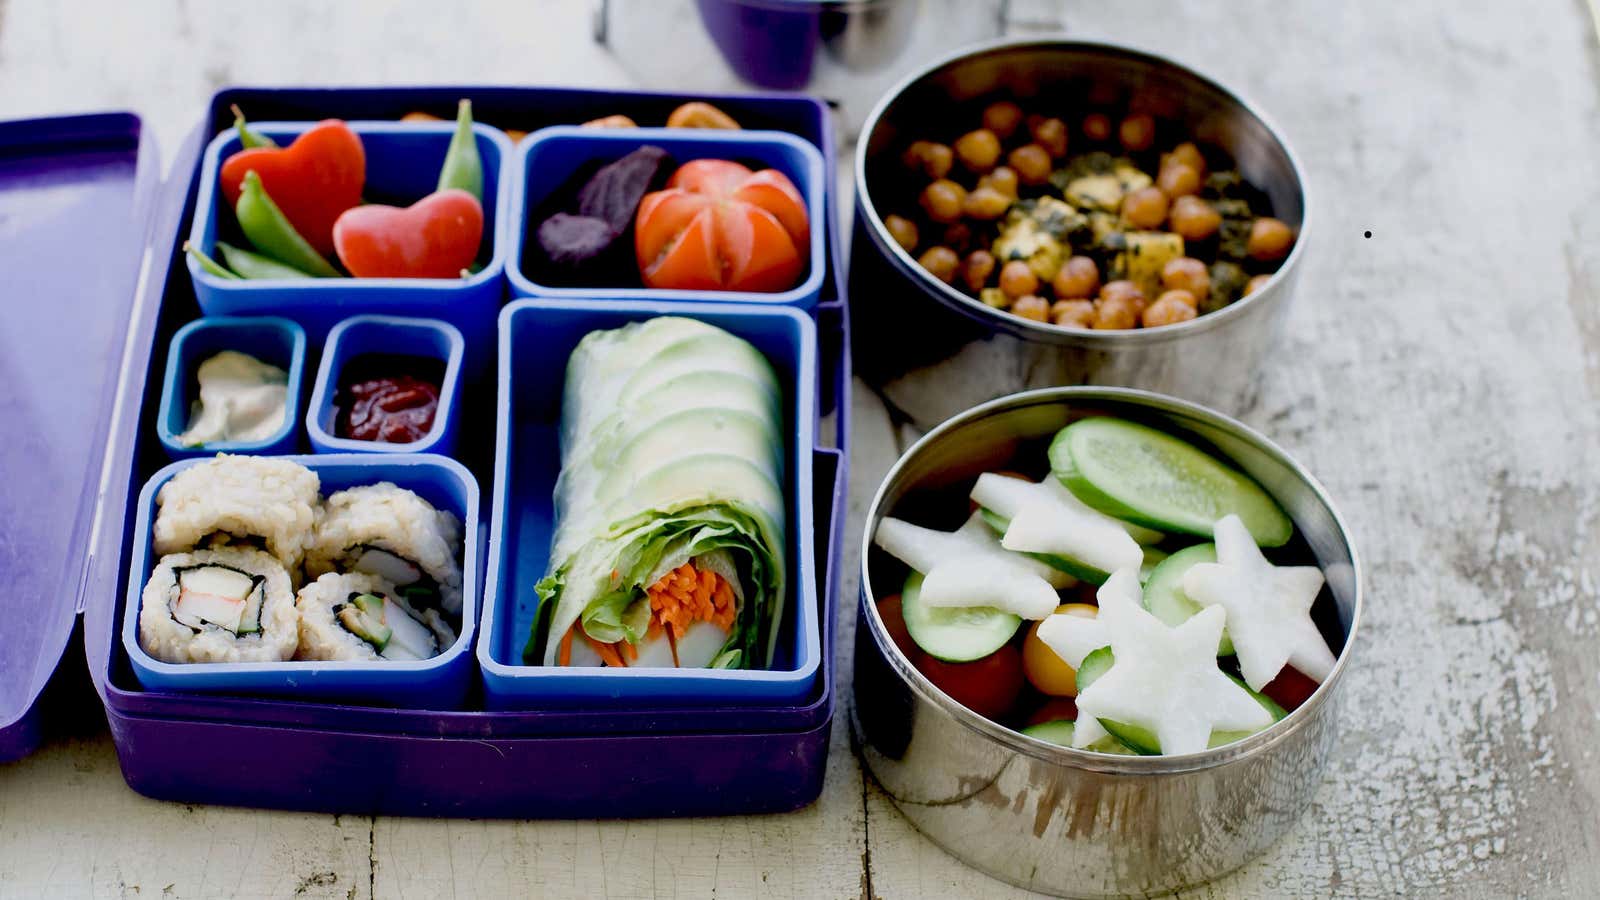 Why Boring Packed Lunches Might Be Best For Some Kids